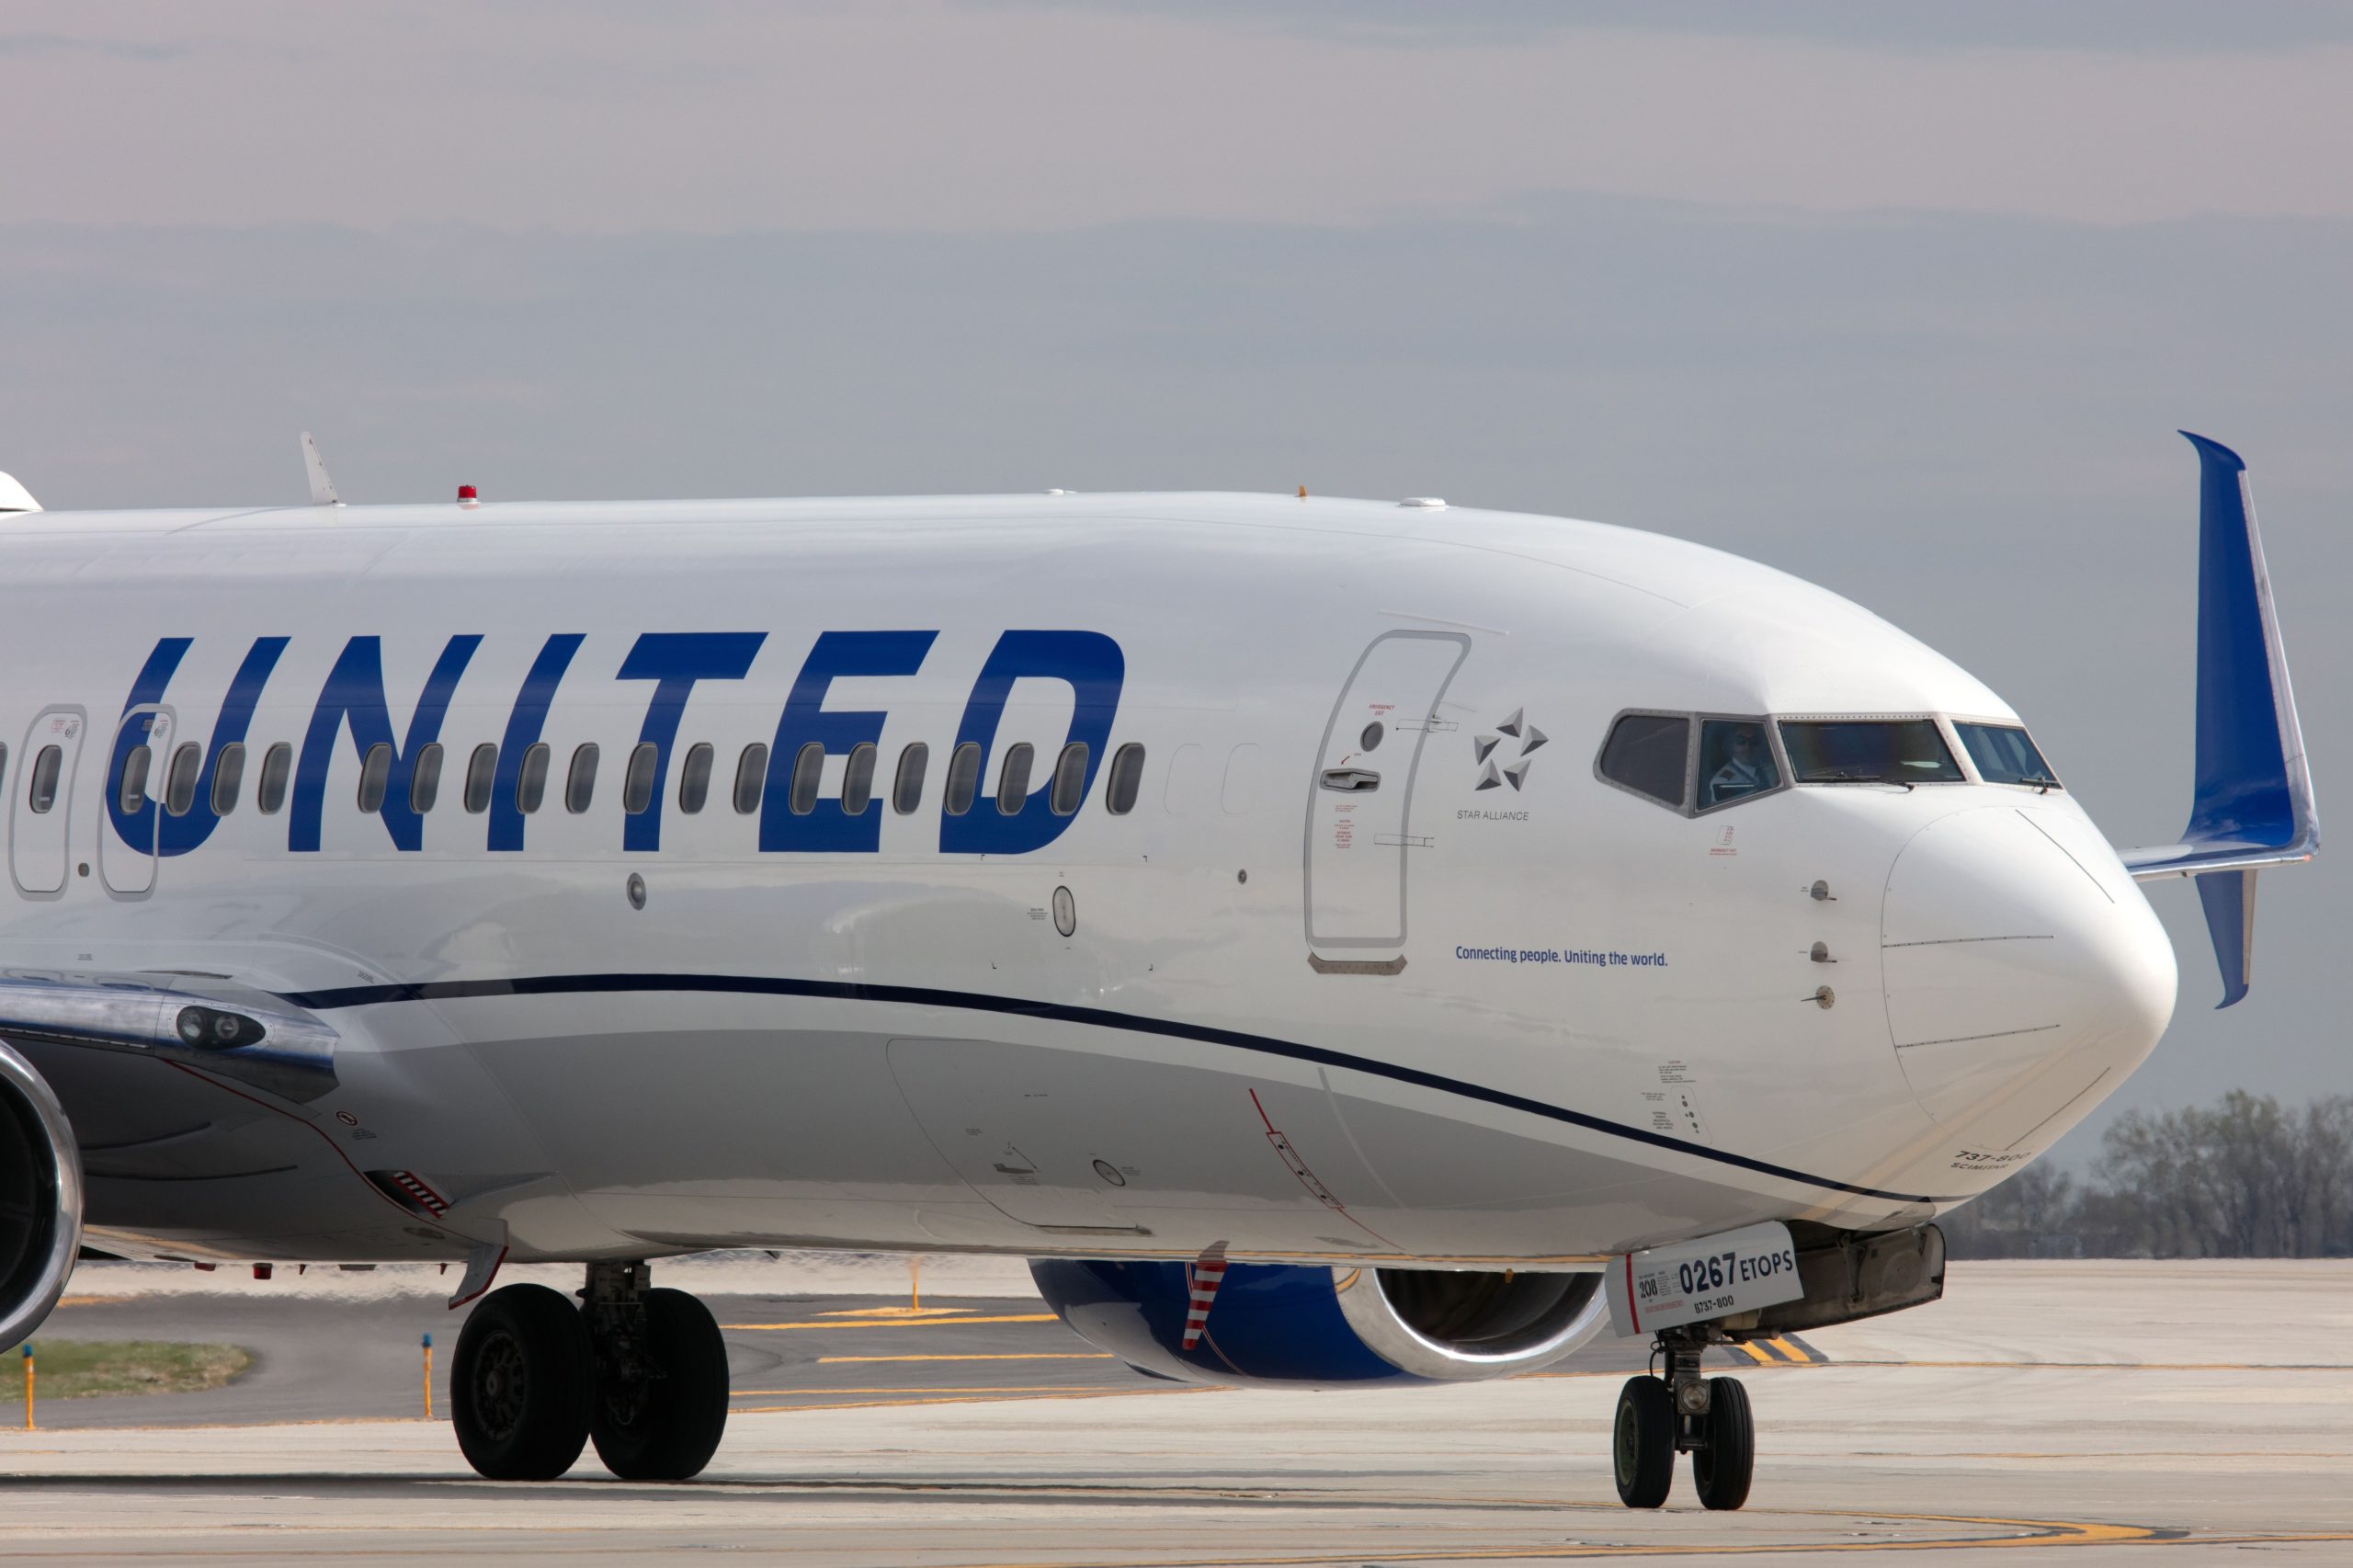 United Airlines 737-8_Livery